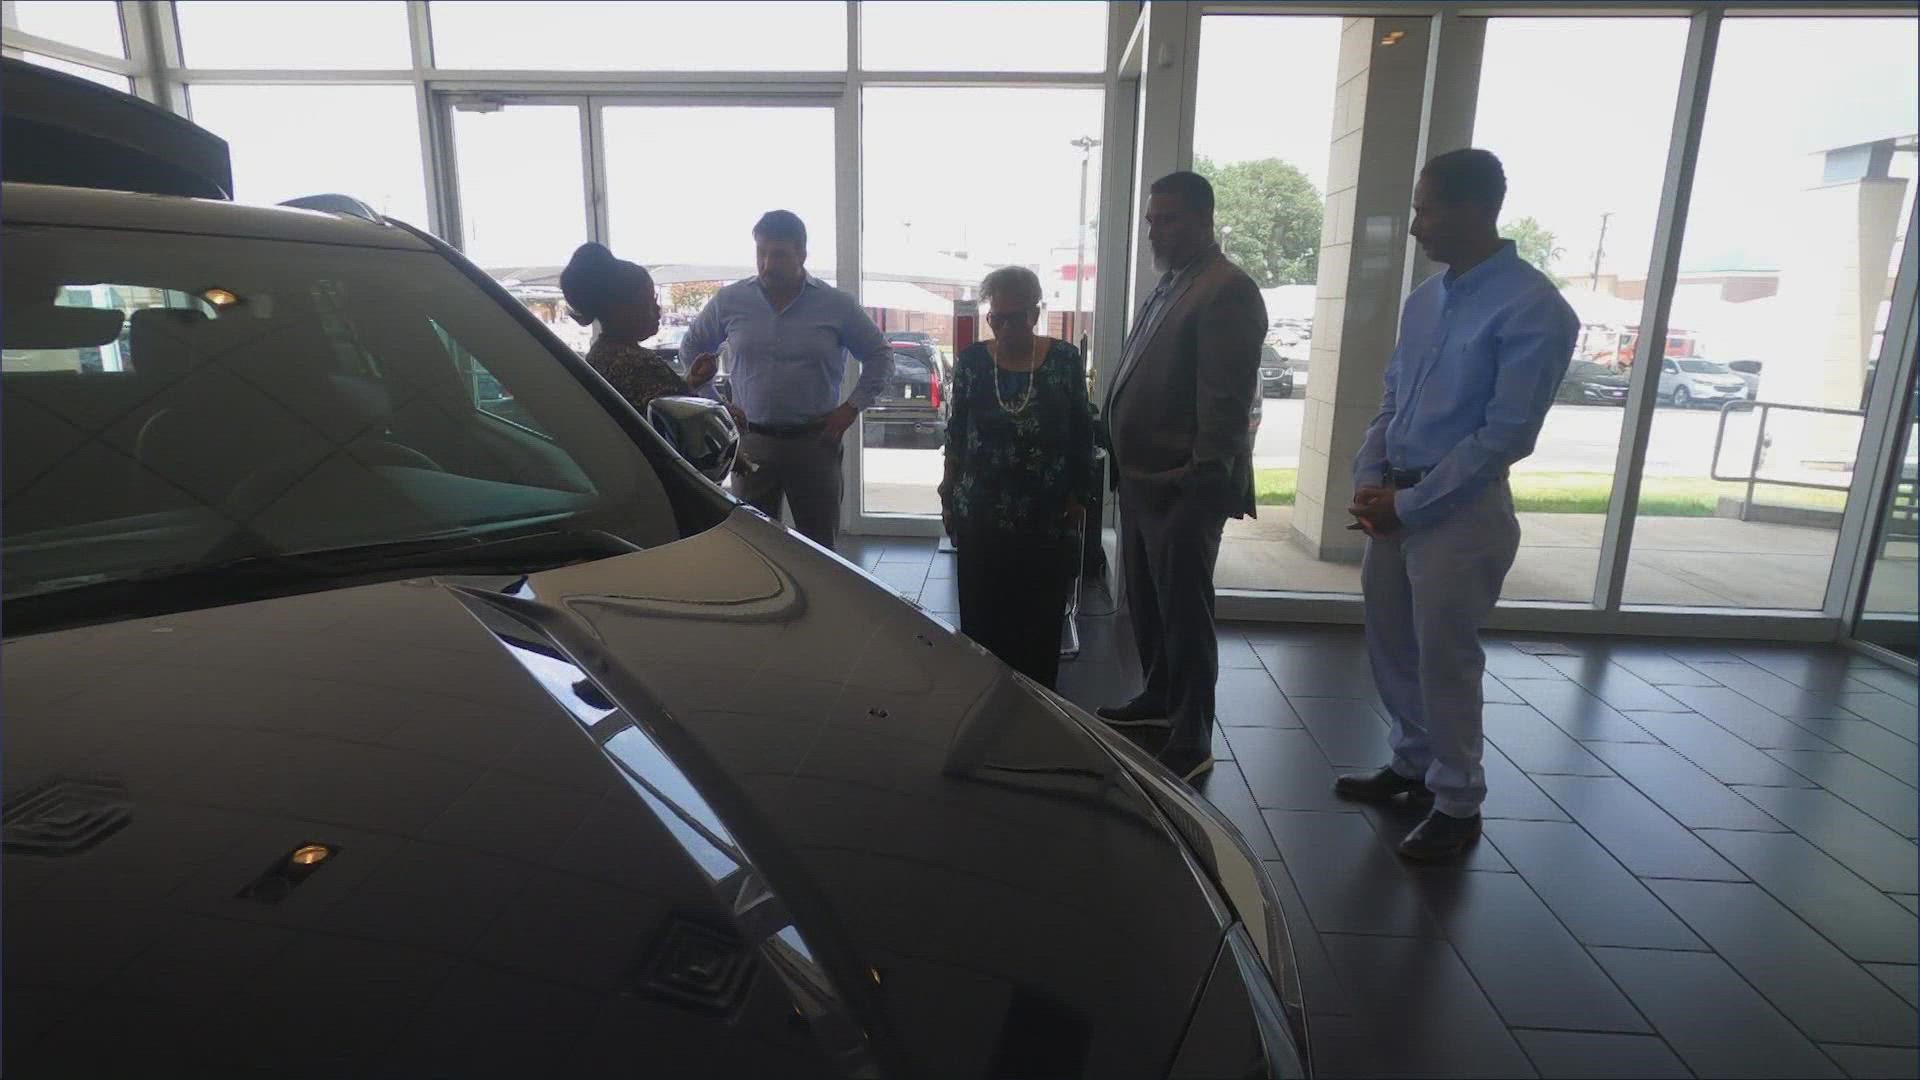 Opal Lee has wanted to include a car giveaway during Juneteenth for quite some time now, according to one of her neighbors. Now, that has become a reality.